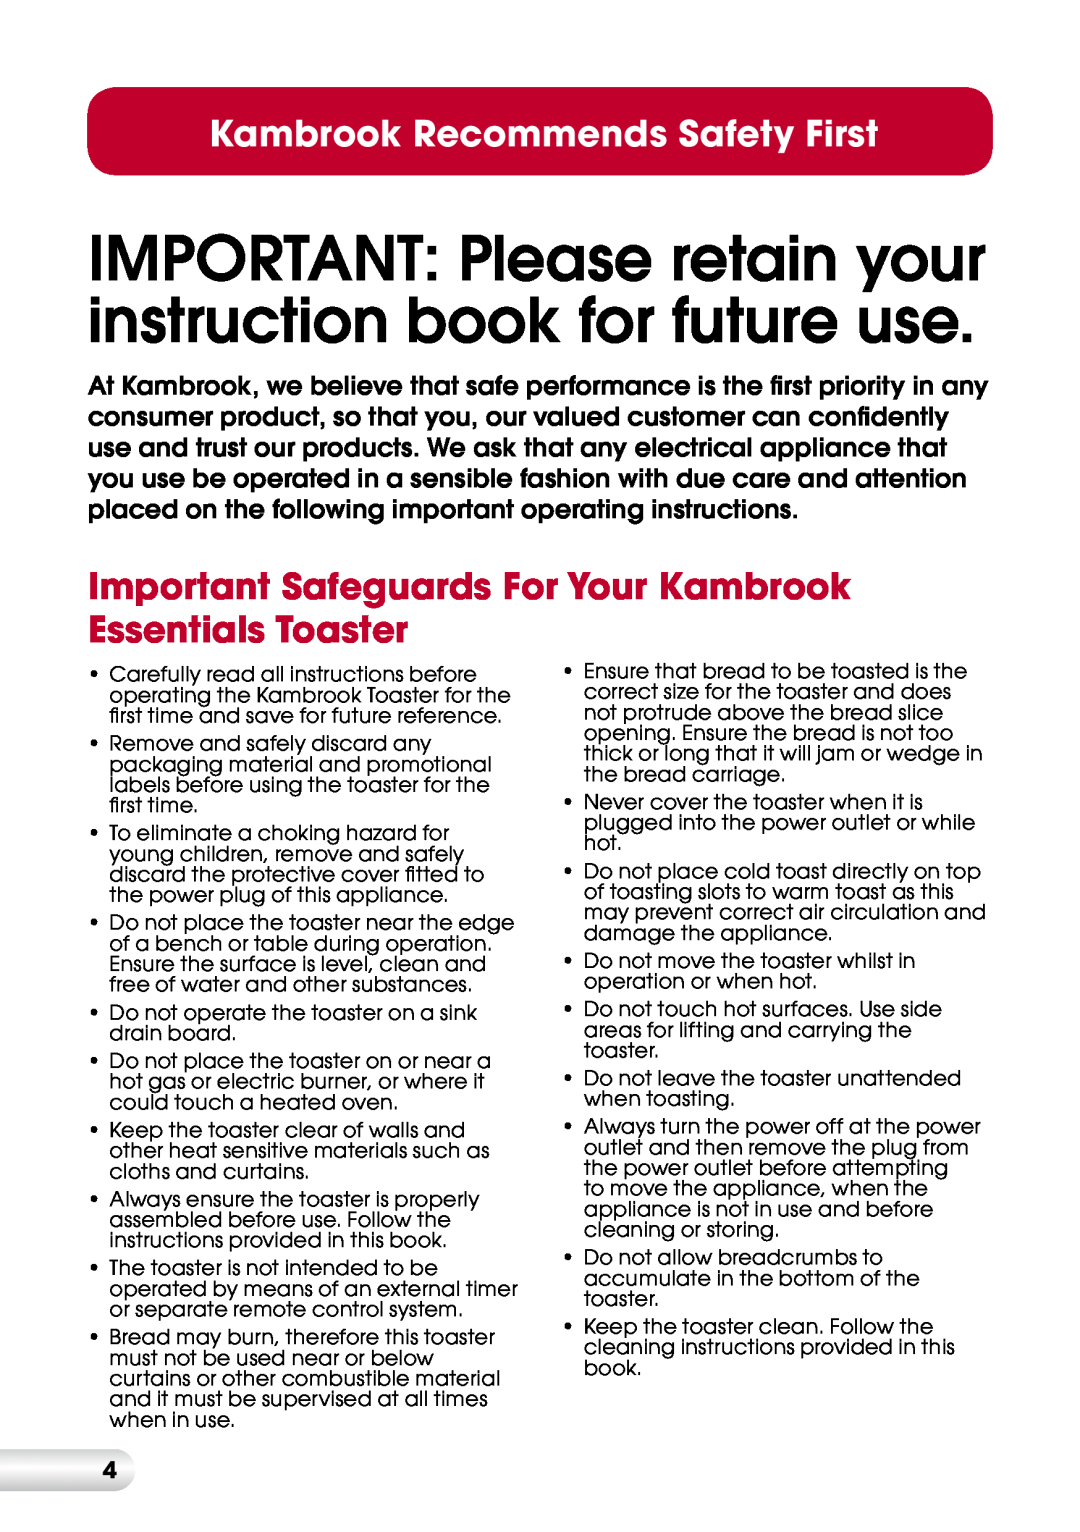 Kambrook KT60 manual Kambrook Recommends Safety First 